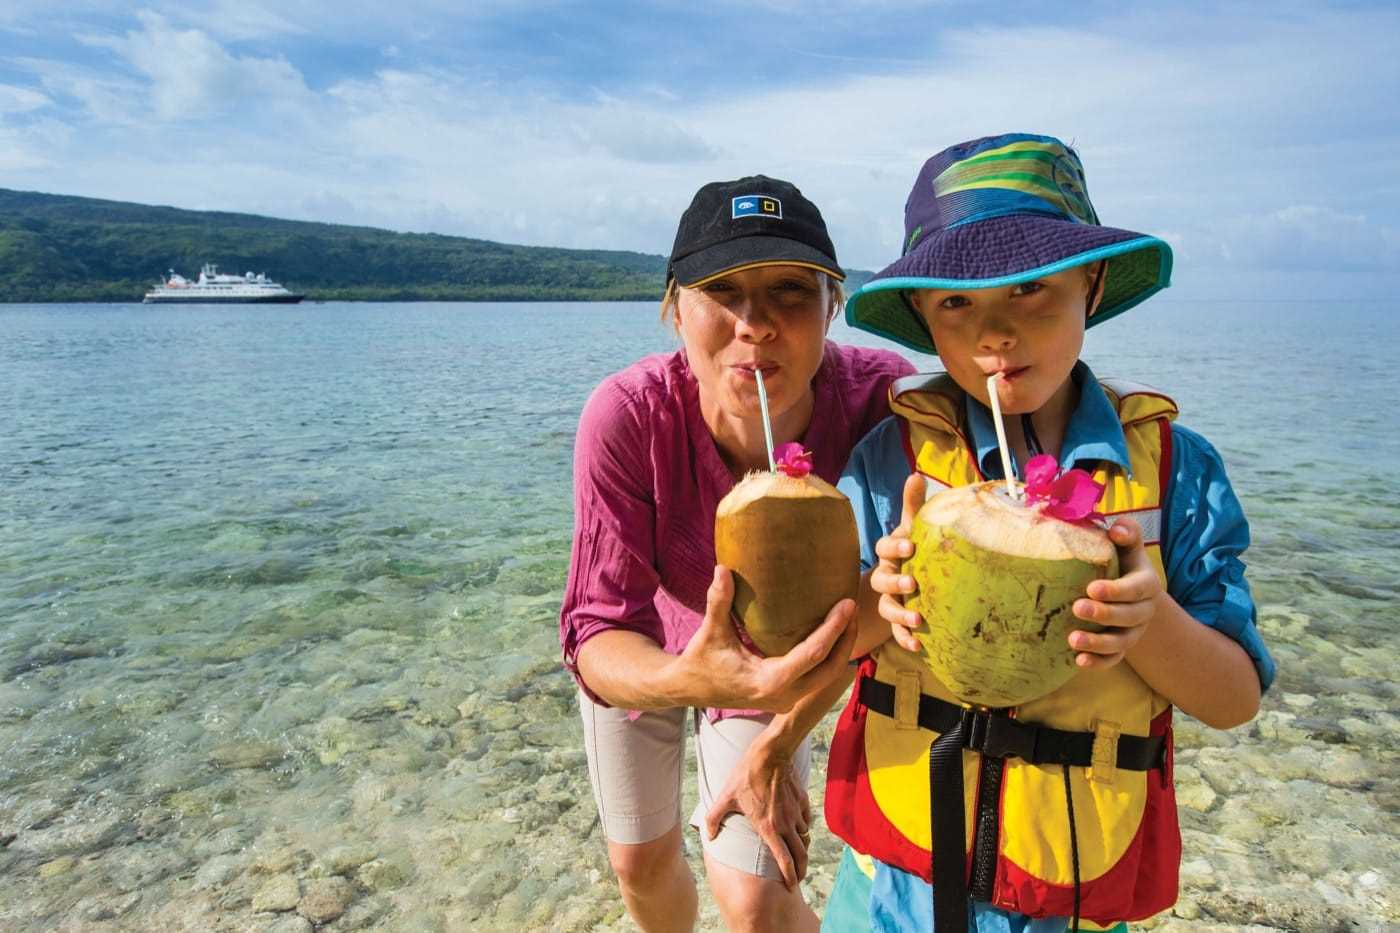 Two people—and adult and a child—drink out of coconuts using straws. In the background, a cruise ship sits in the bay